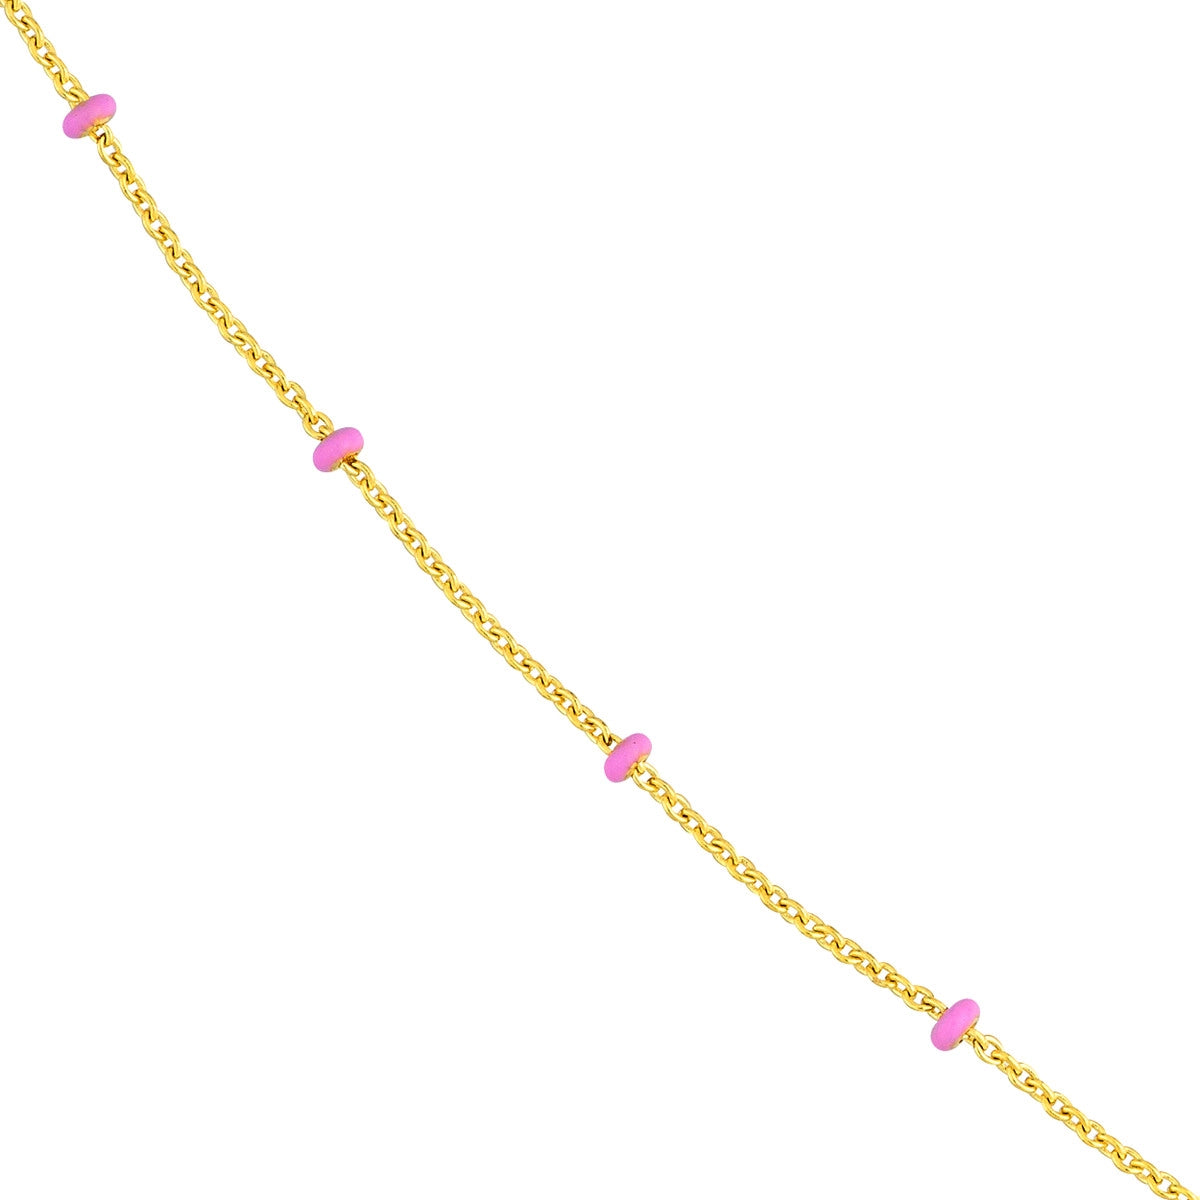 14K GOLD ROLO CHAIN WITH ENAMEL BEADS14K GOLD ROLO CHAIN WITH ENAMEL BEADS